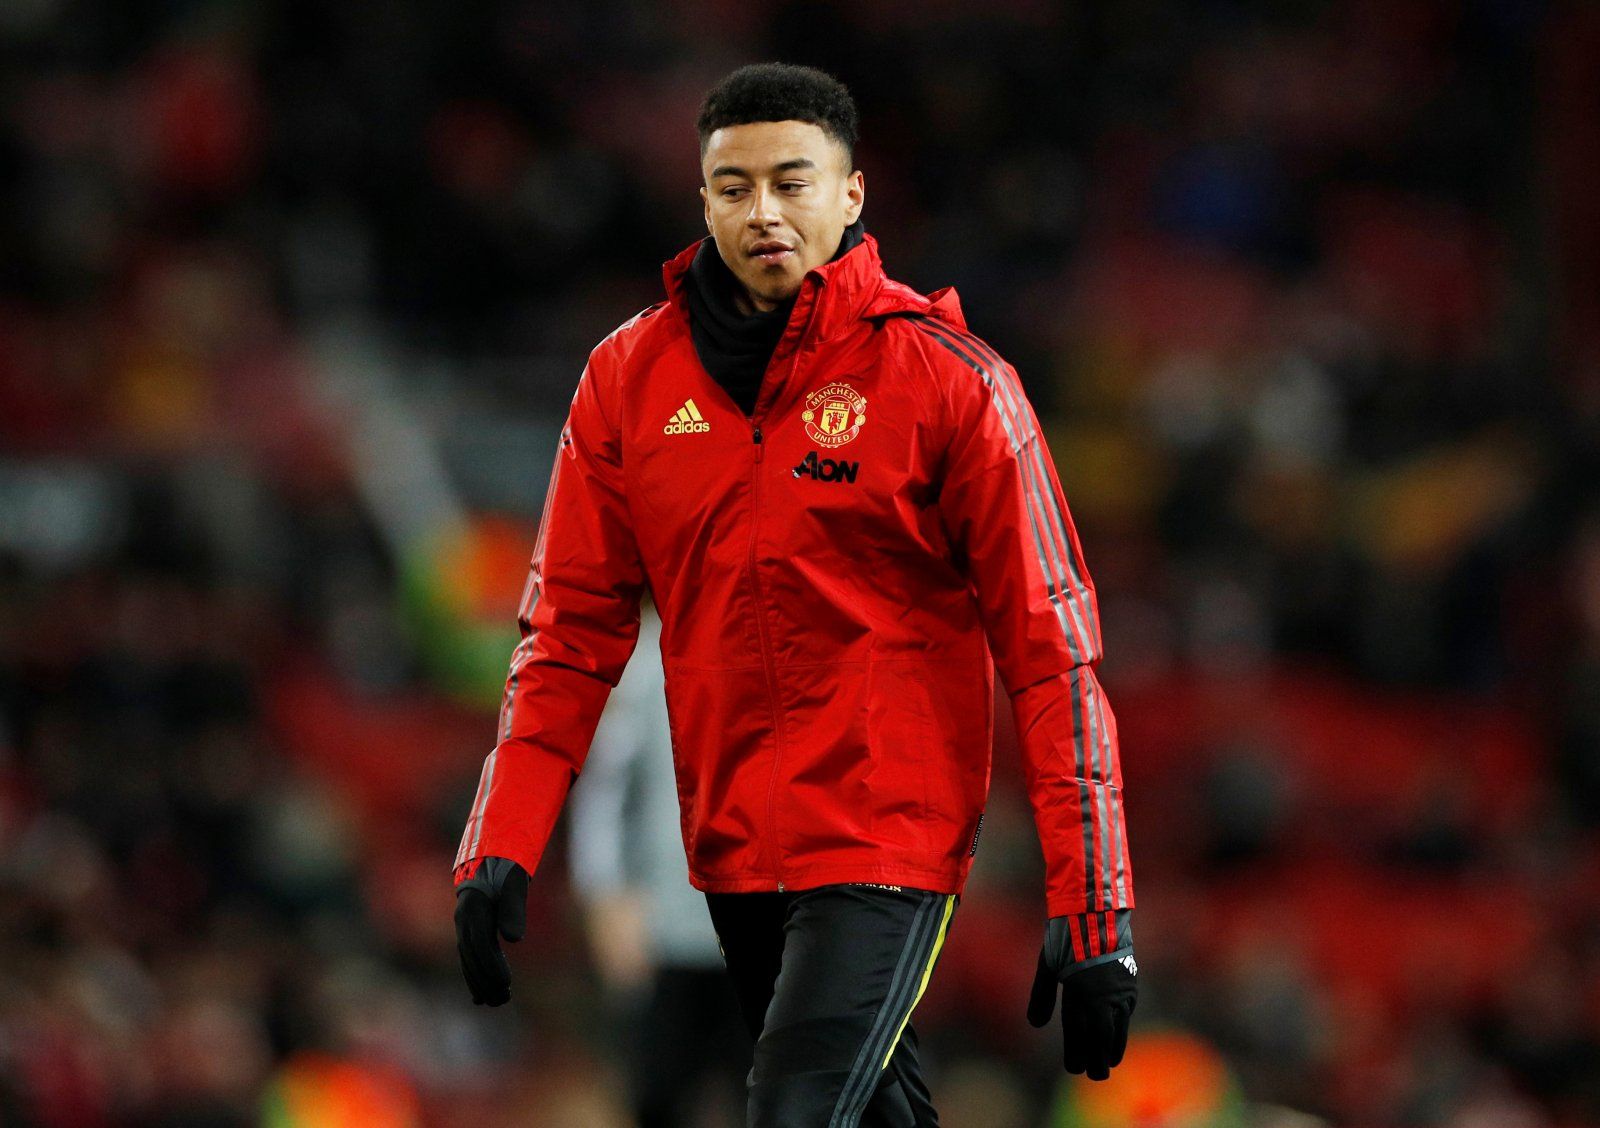 Celtic: Pundit believes Parkhead switch would be a ‘great move’ for Jesse Lingard -Celtic News